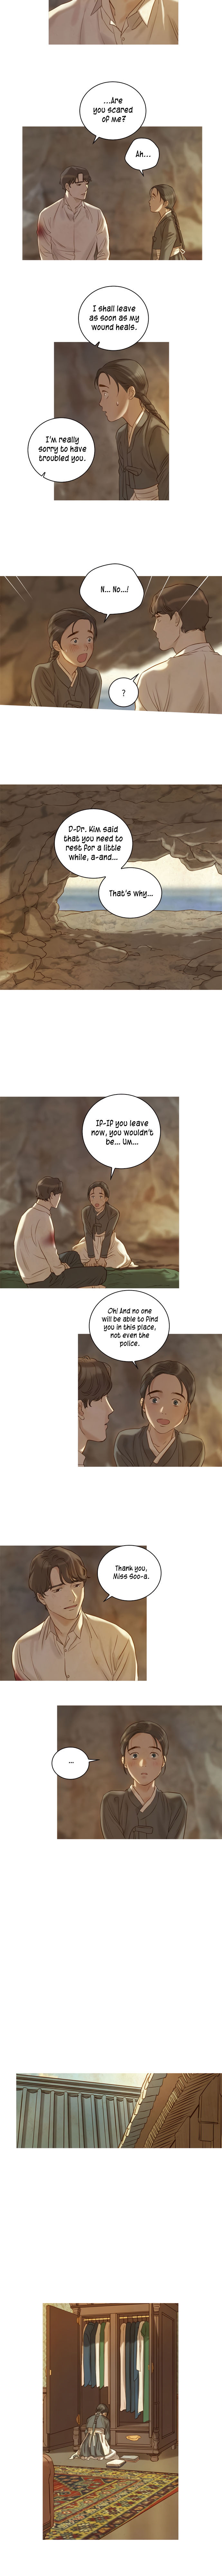 Gorae Byul - The Gyeongseong Mermaid - Chapter 3 Page 7